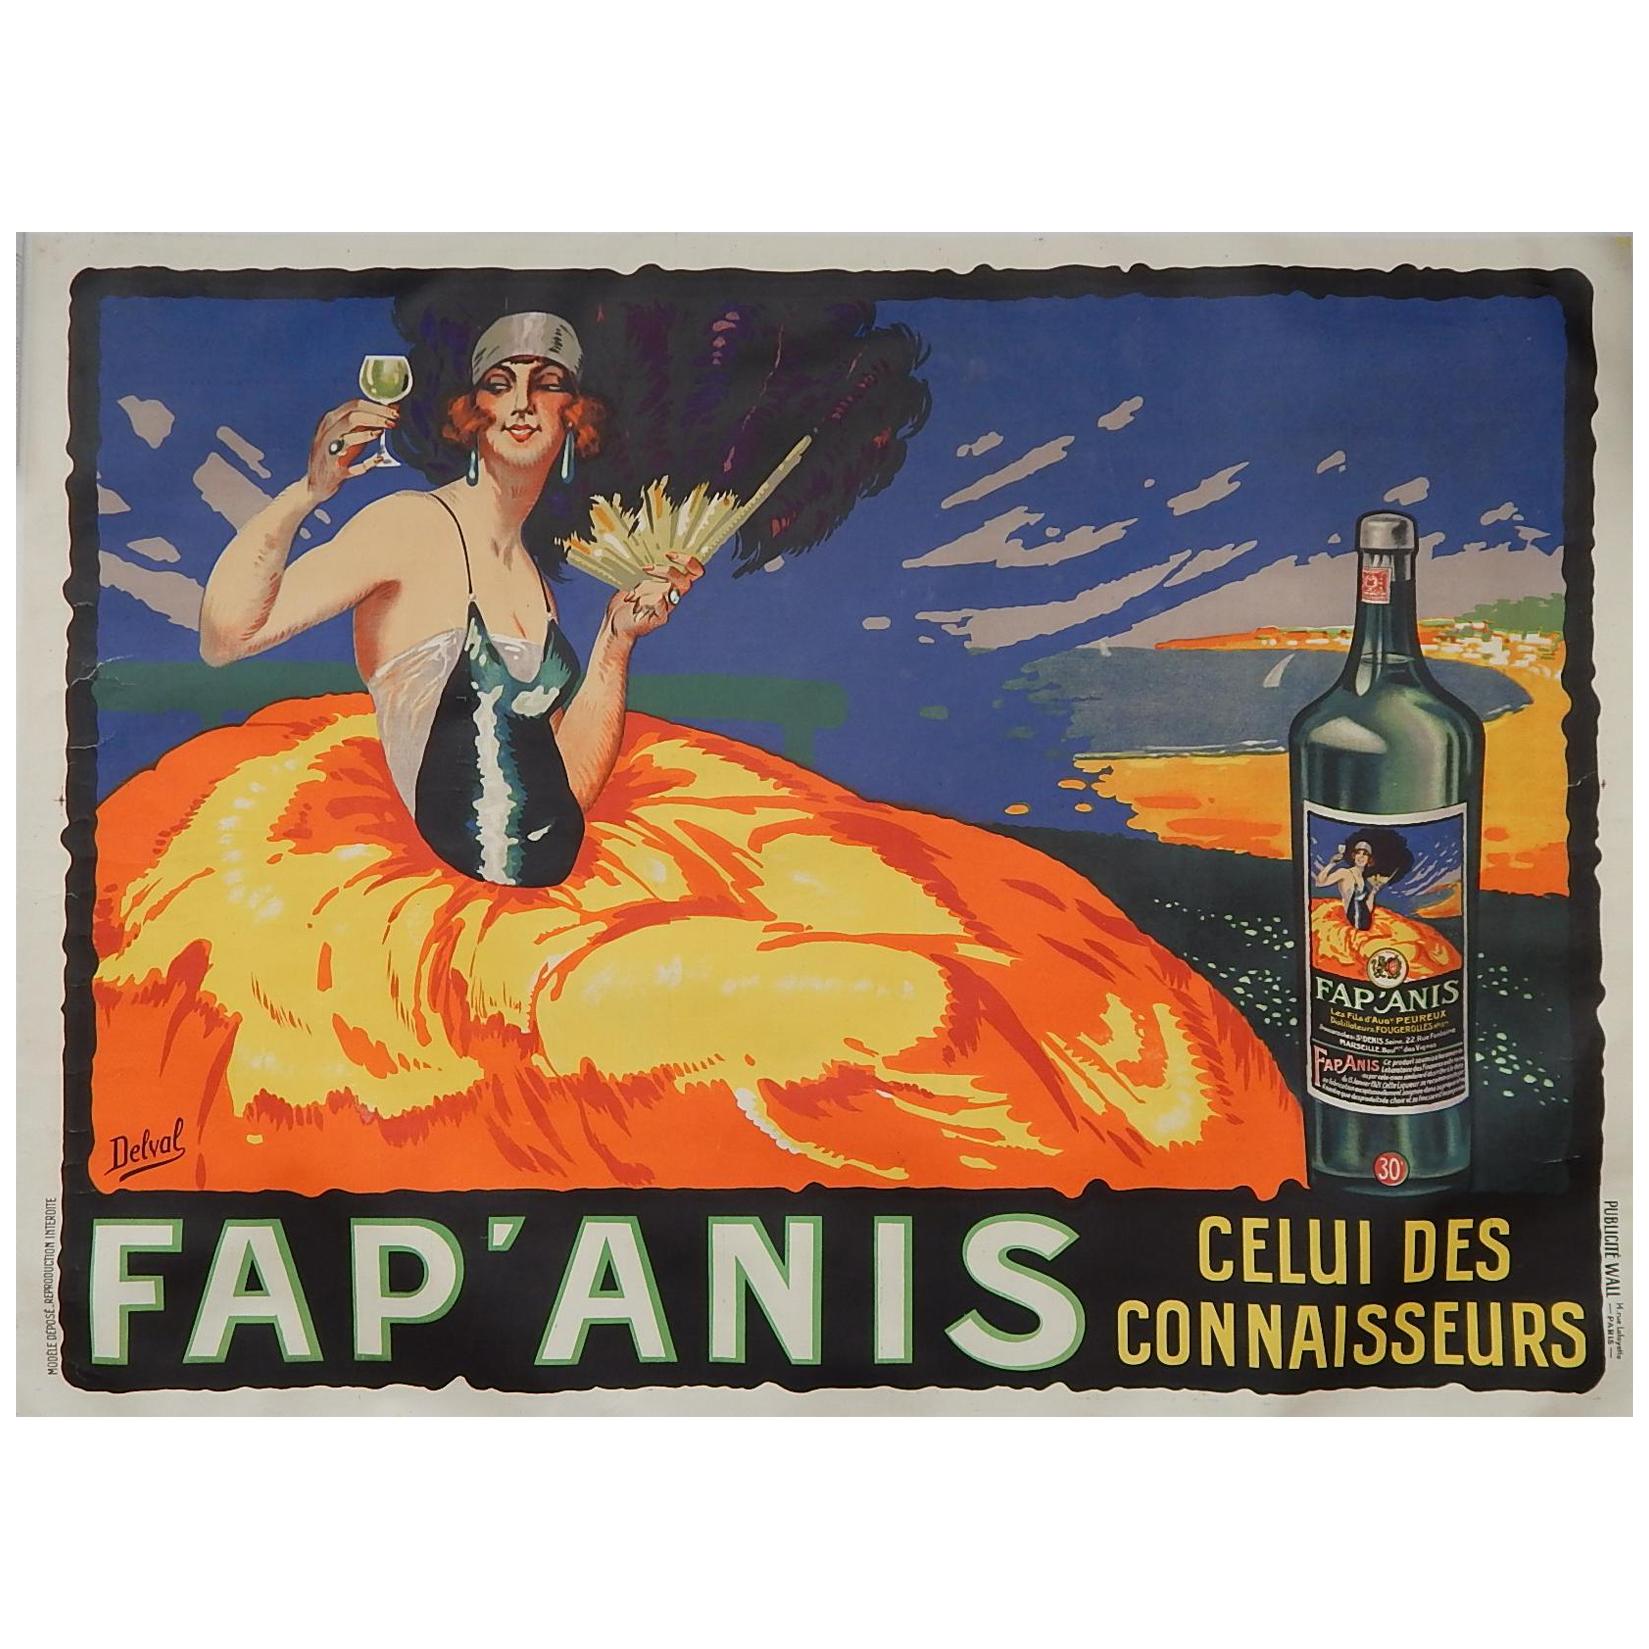 Original Vintage French Art Deco Poster by Delval, circa 1930s, Fap' Anis